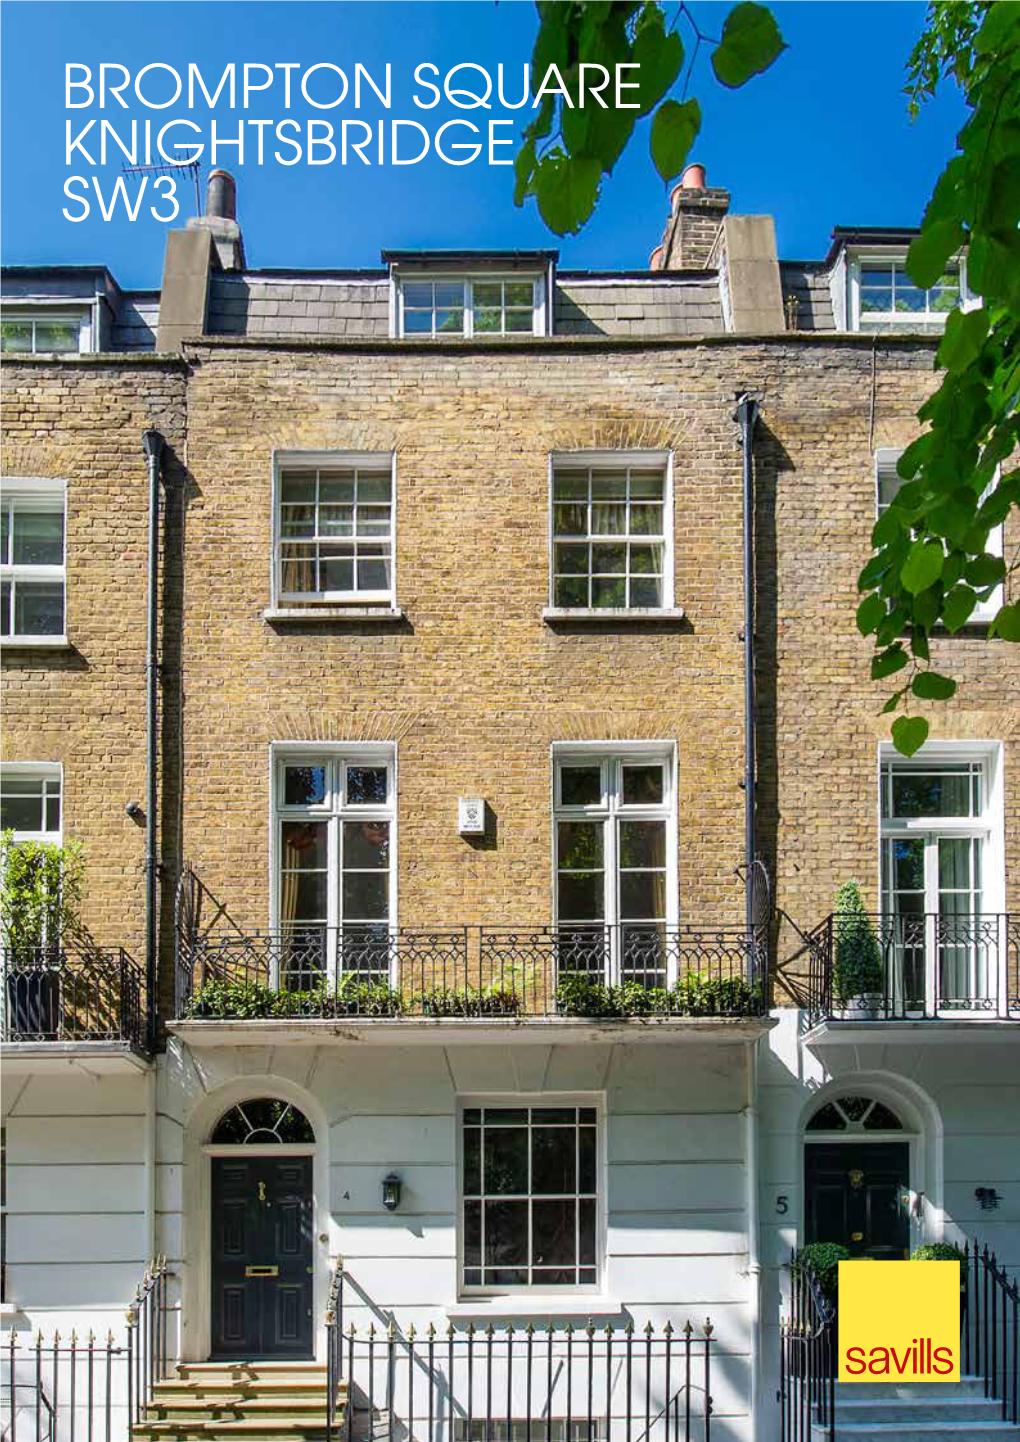 BROMPTON SQUARE KNIGHTSBRIDGE SW3 a Wonderful Unmodernised Grade II Listed Family House on This Popular Knightsbridge Square